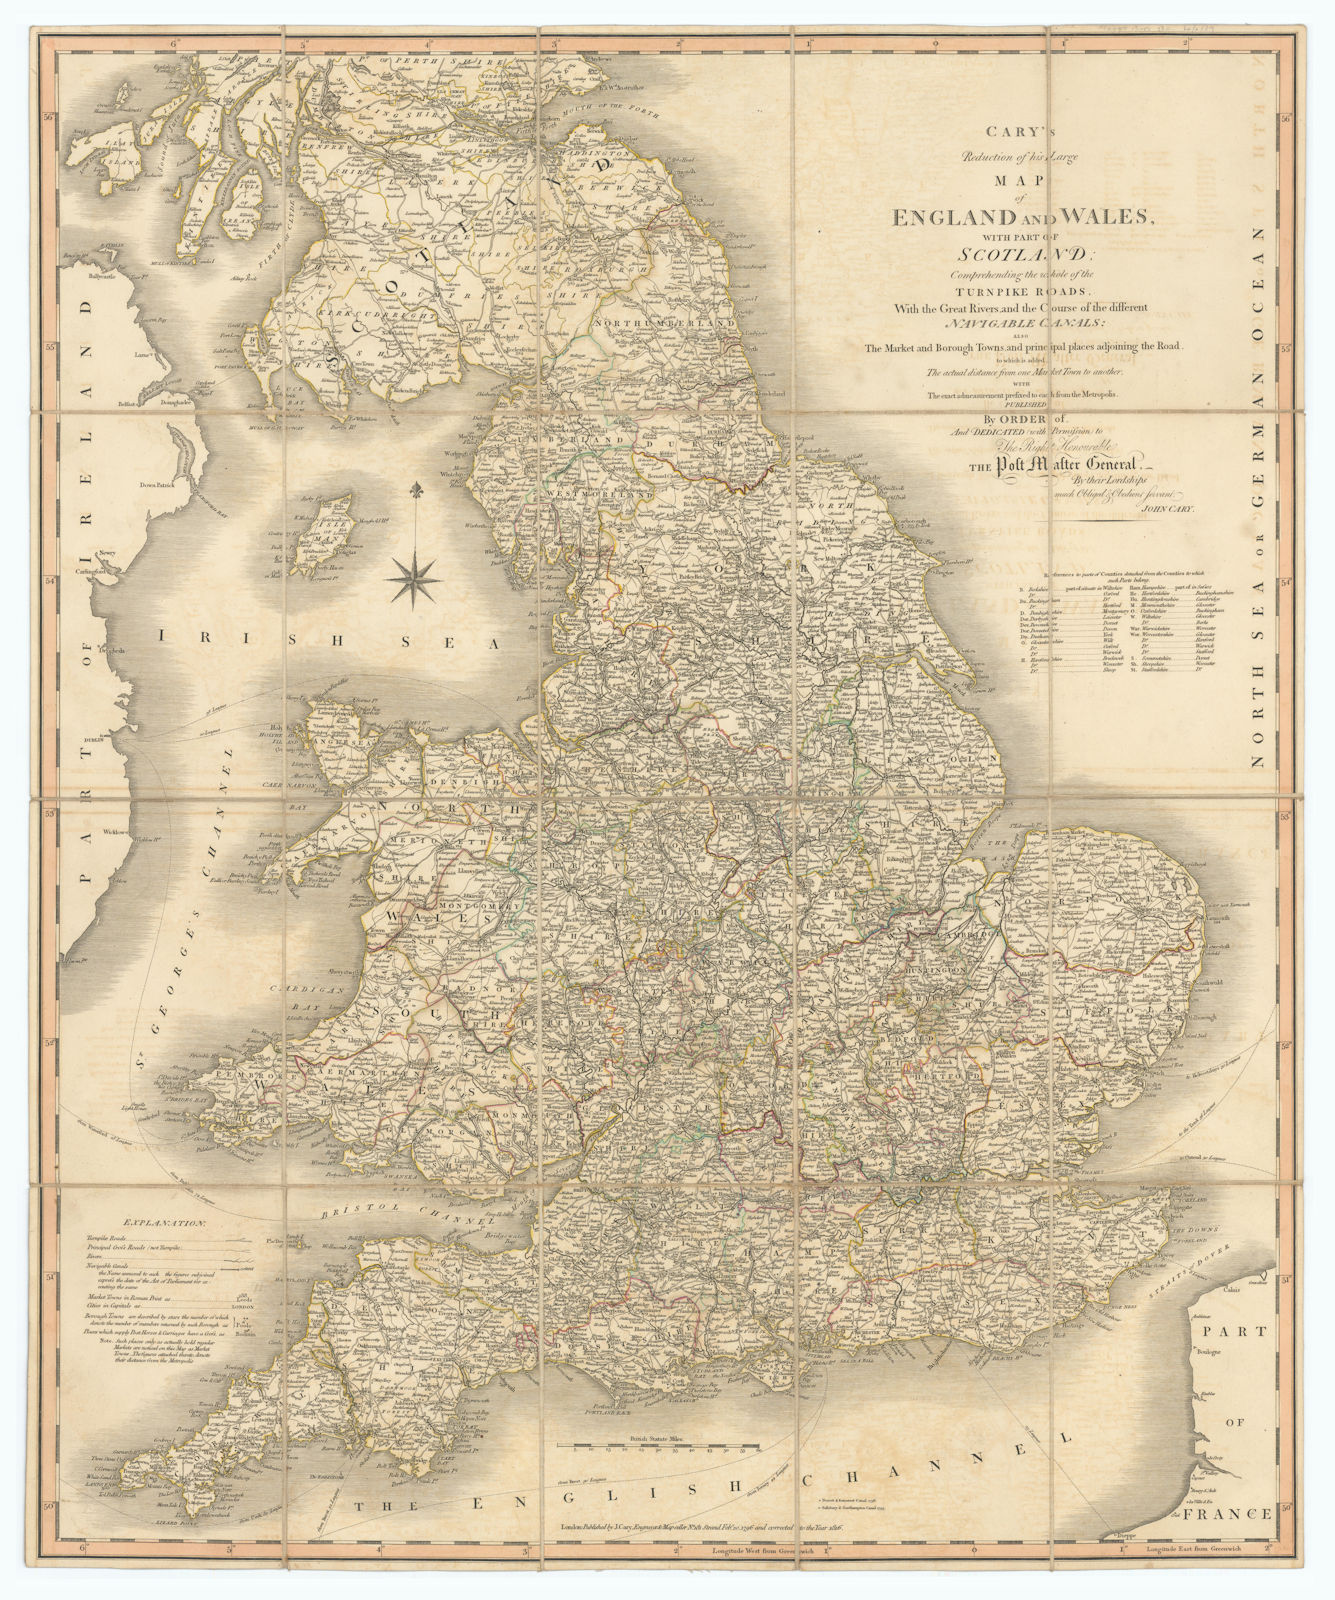 Associate Product 'Cary's reduction of his large map of England & Wales'. Turnpikes canals &c 1816